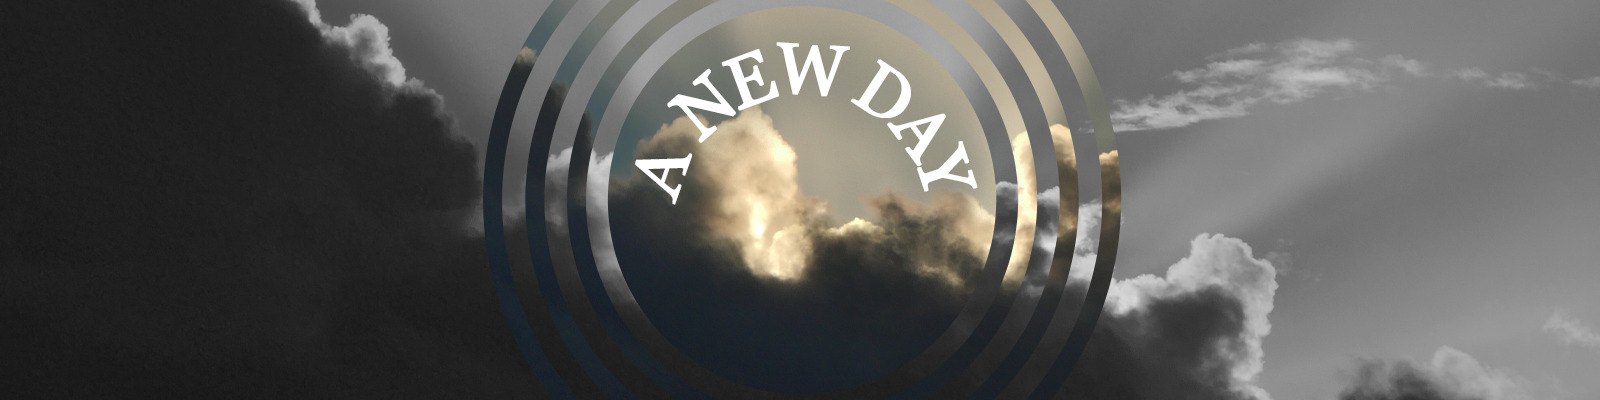 A-NEW-DAY-website-1